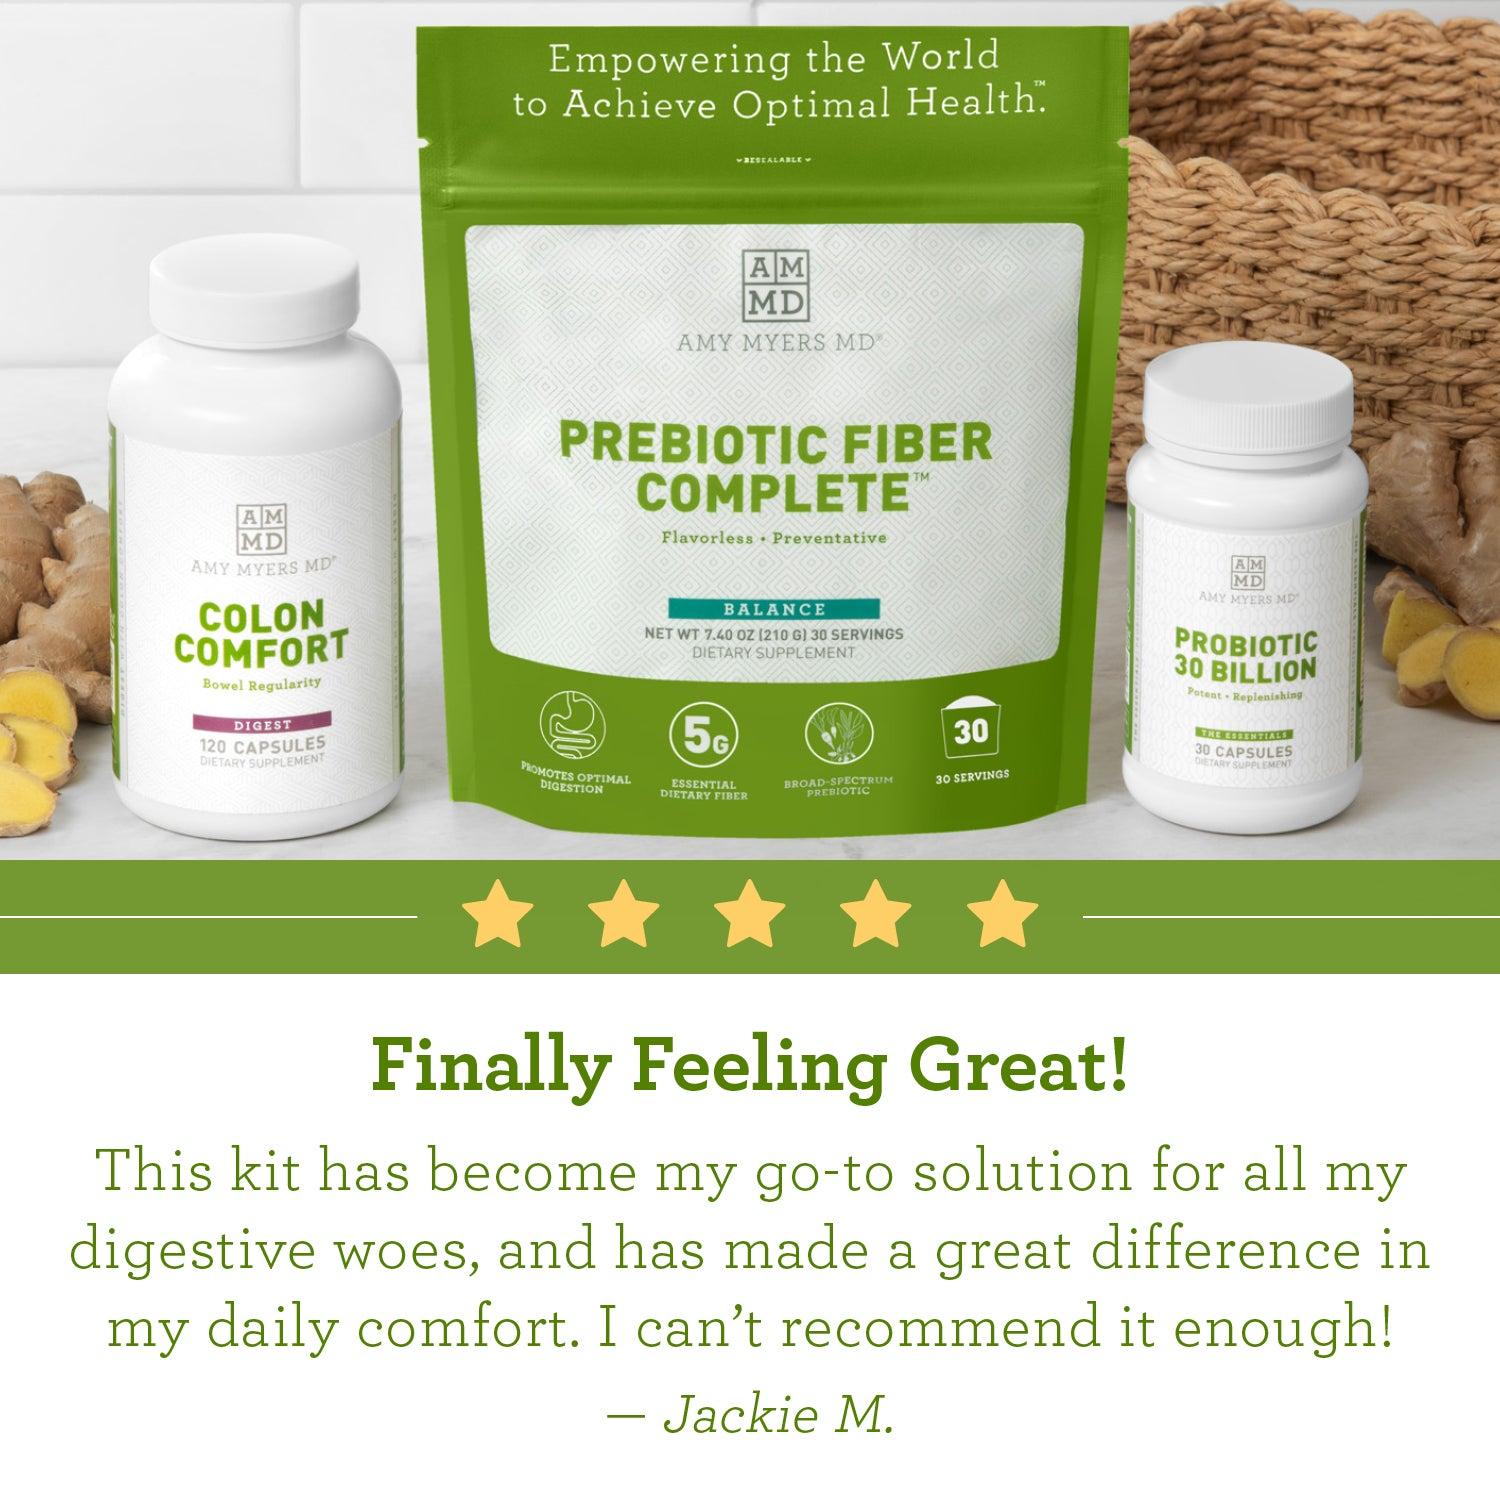 Picture of the Constipation Support Kit with a review, "Finally Feeling Great! This kit has become my go to solution for all my digestive woes, and has made a great difference in my daily comfort.  I can't recommend it enough!" - Jackie M. 